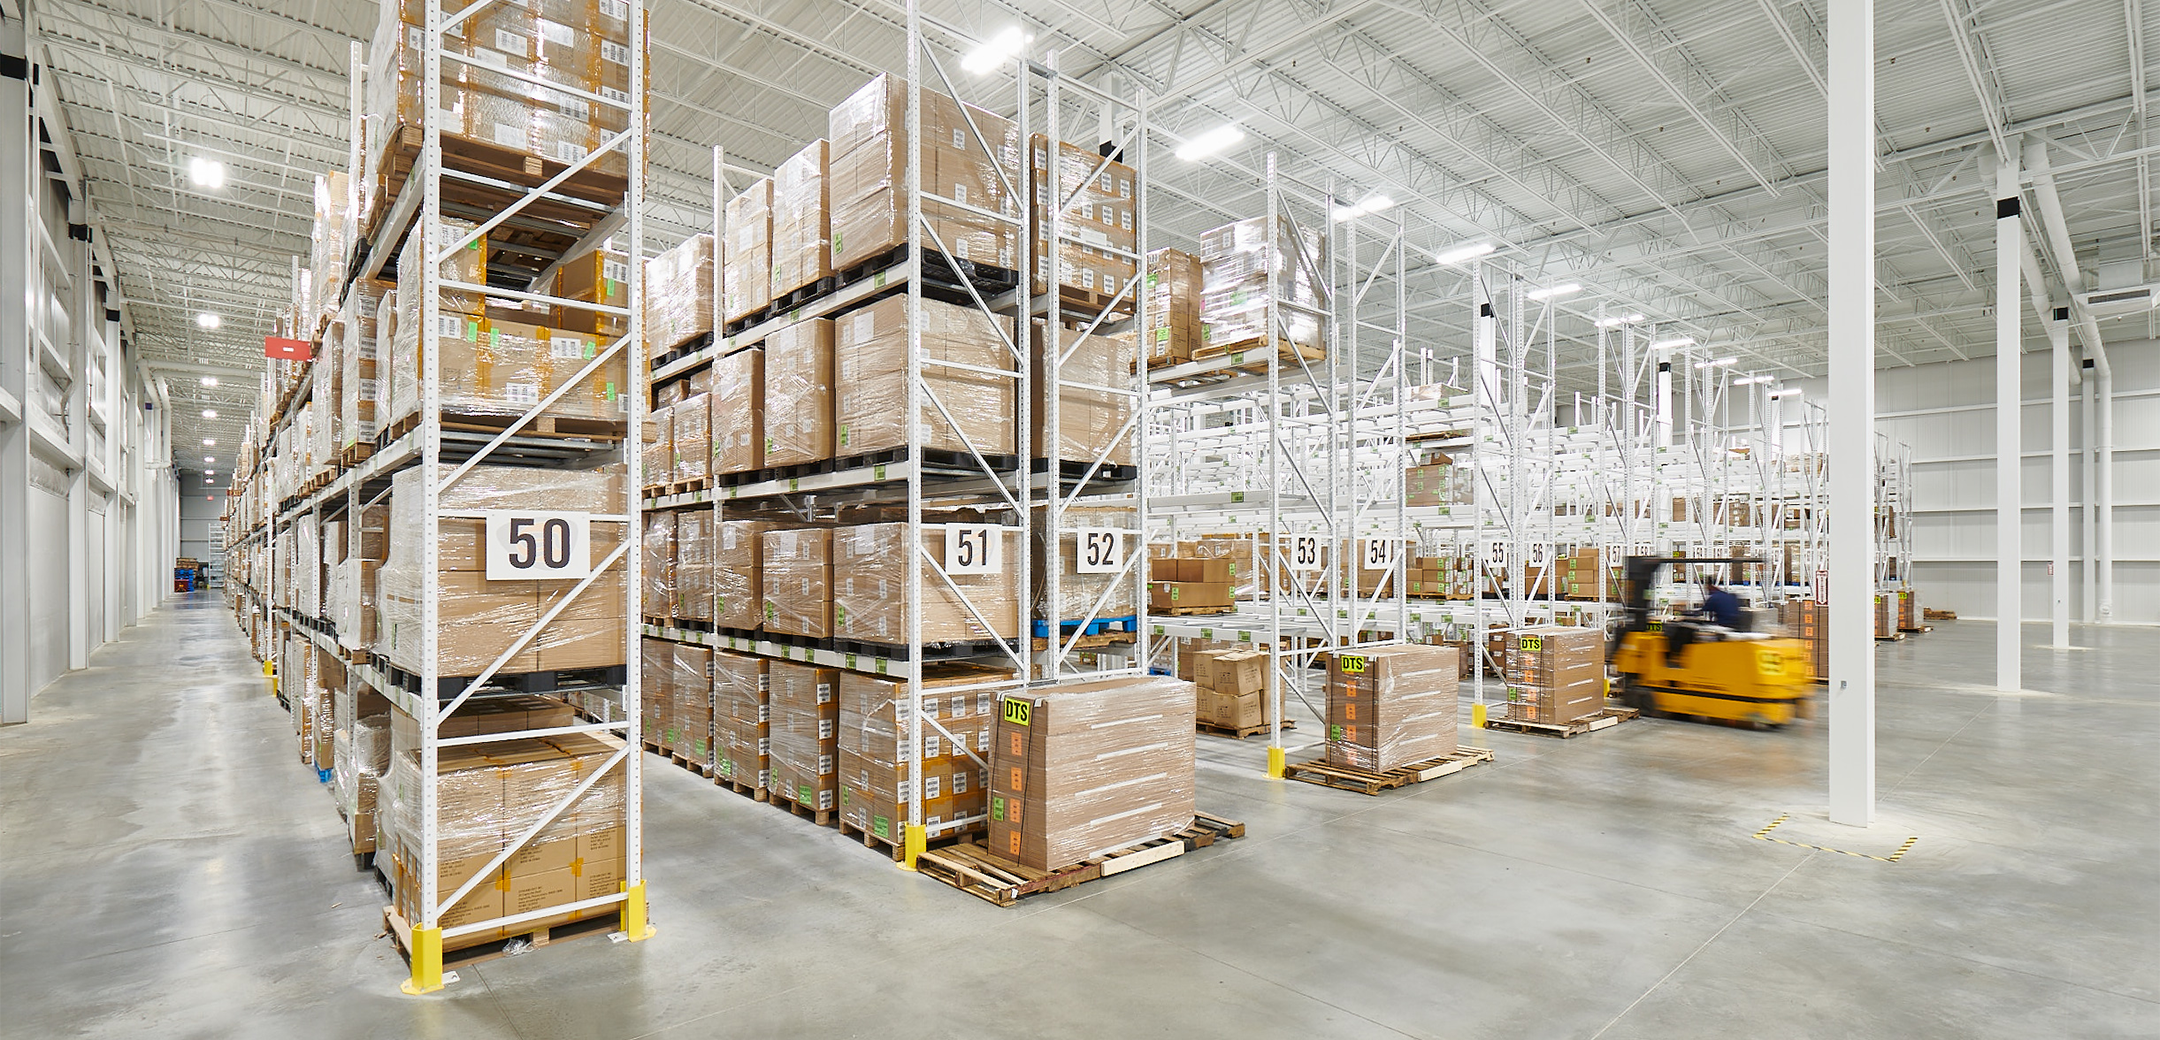 An interior view of the Streamlight warehouse, showcasing the well lit, white, tall ceiling, rows of storage shelves.